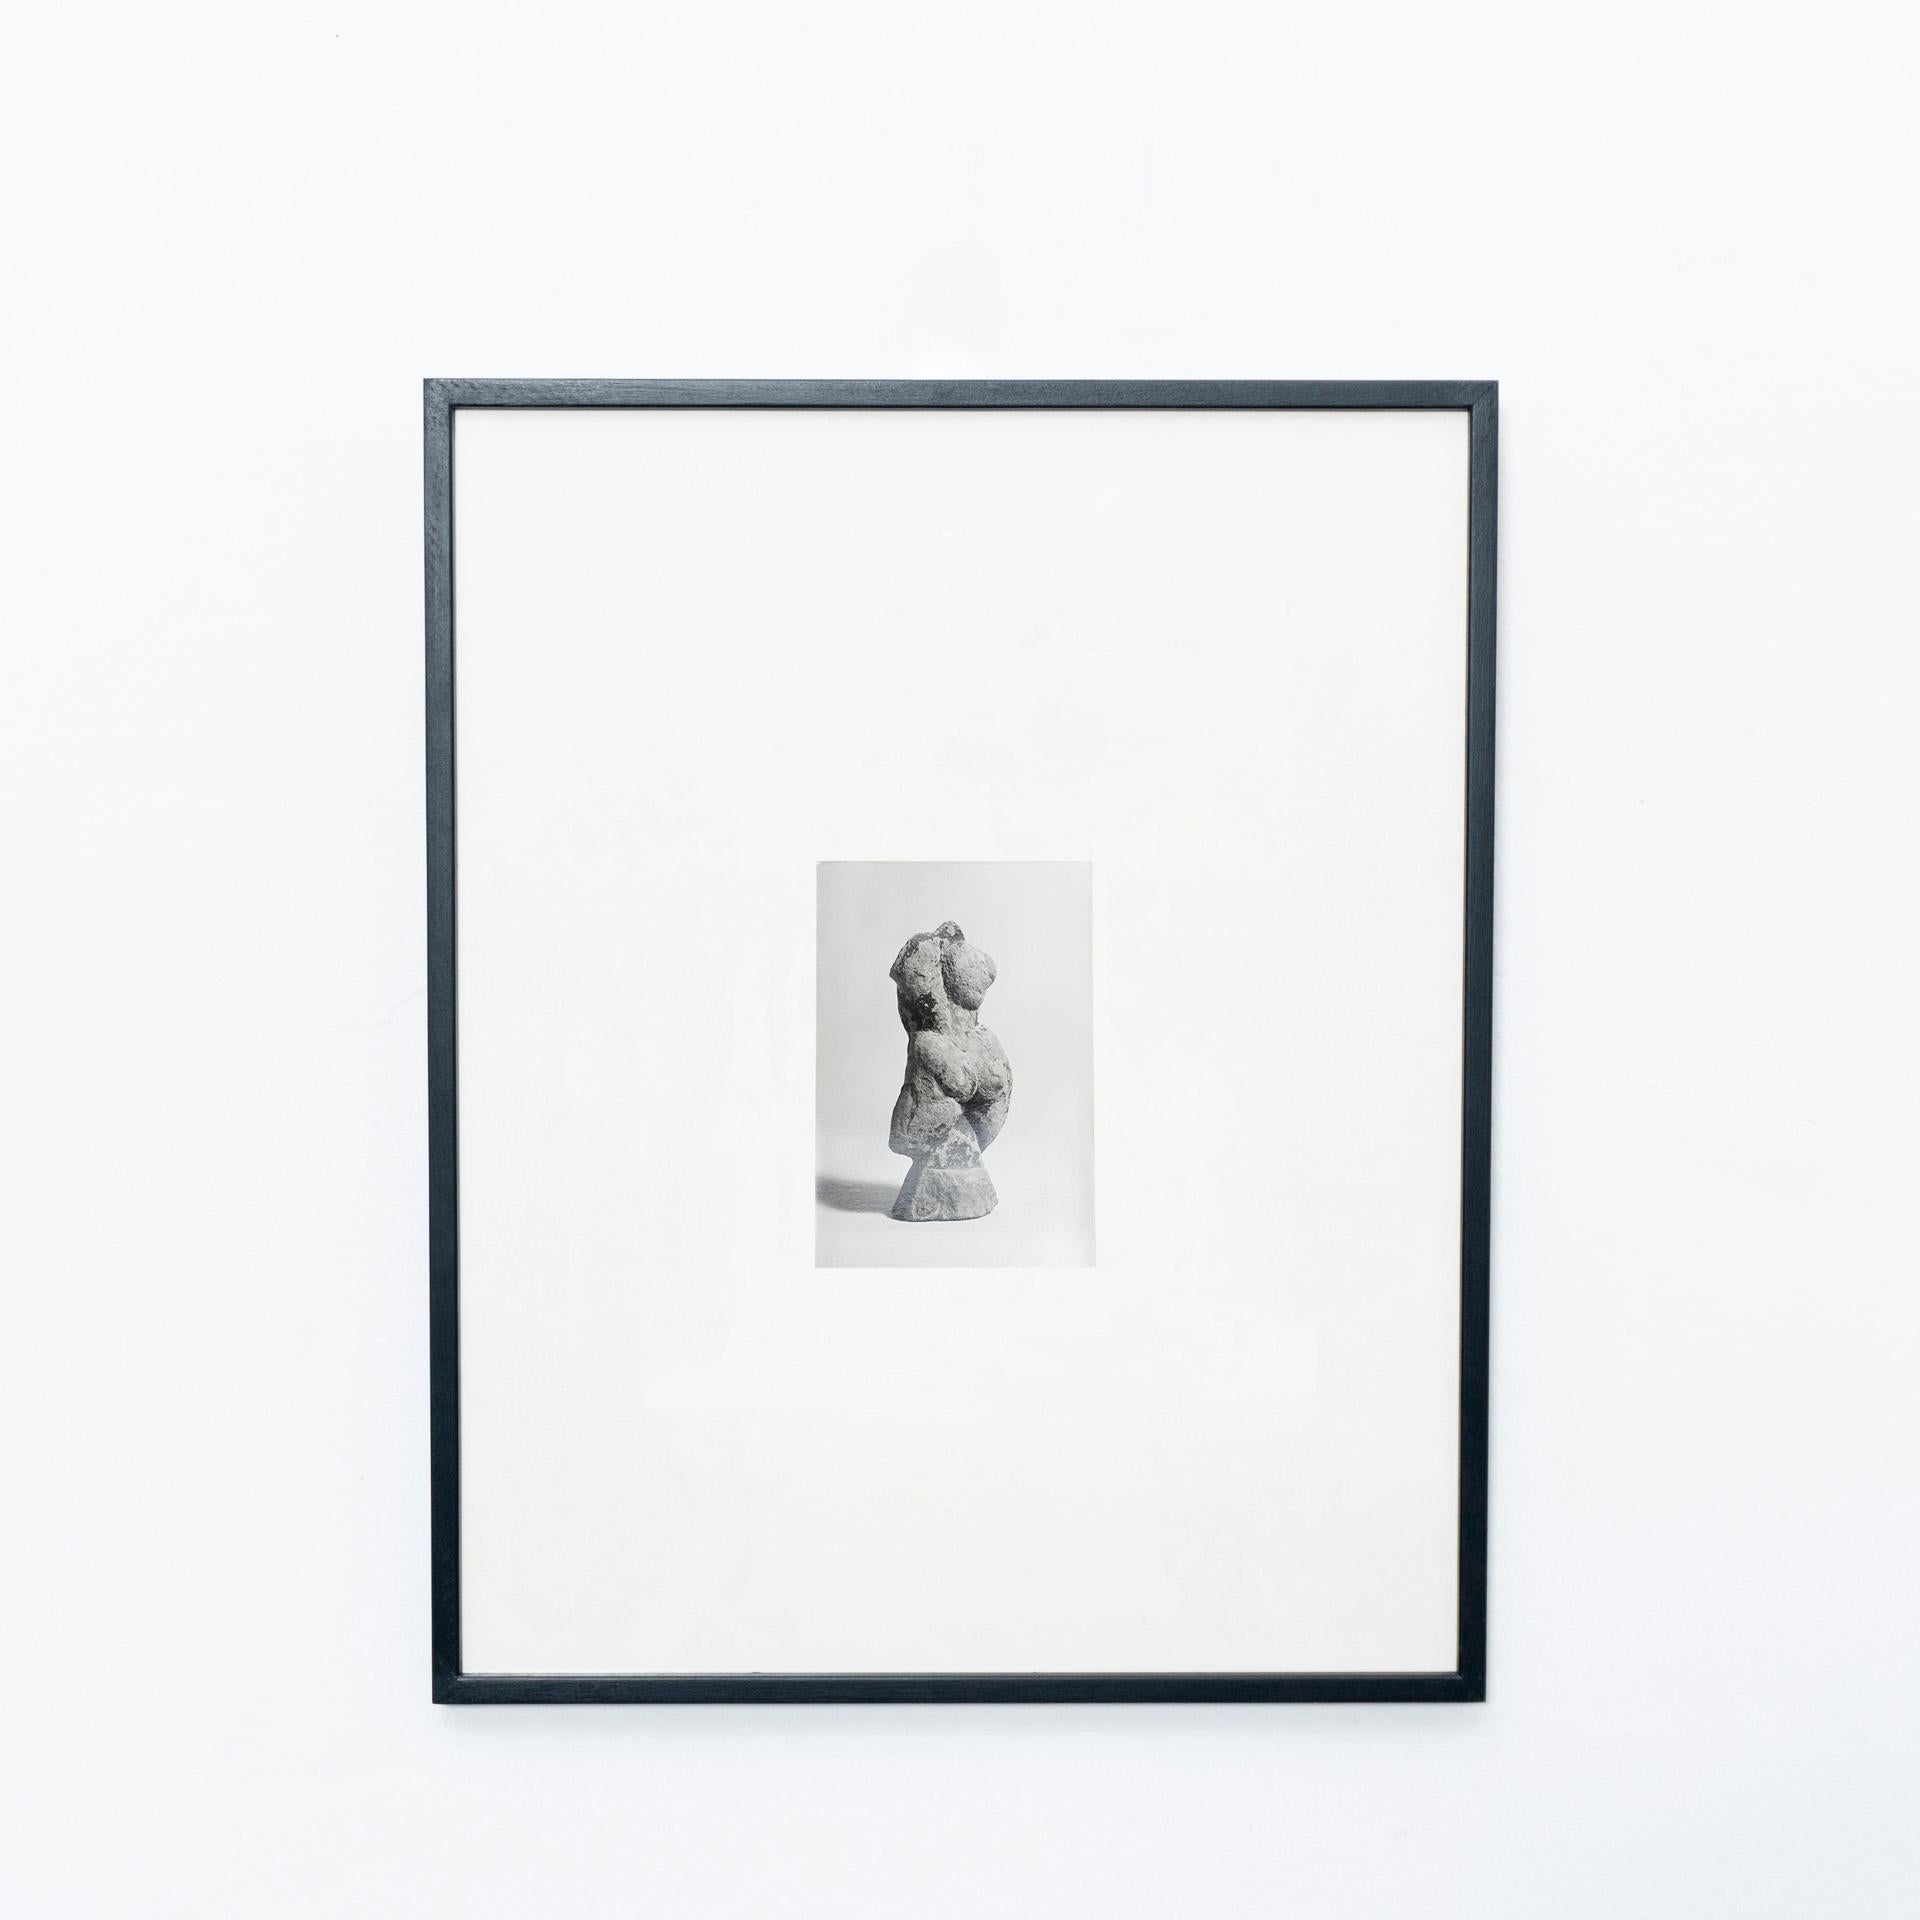 Manolo Hugué archive photography of sculpture.
Printed, circa 1960.

In original condition, with minor wear consistent with age and use, preserving a beautiful patina.

The photography comes framed. The frame on the photos is just an example,